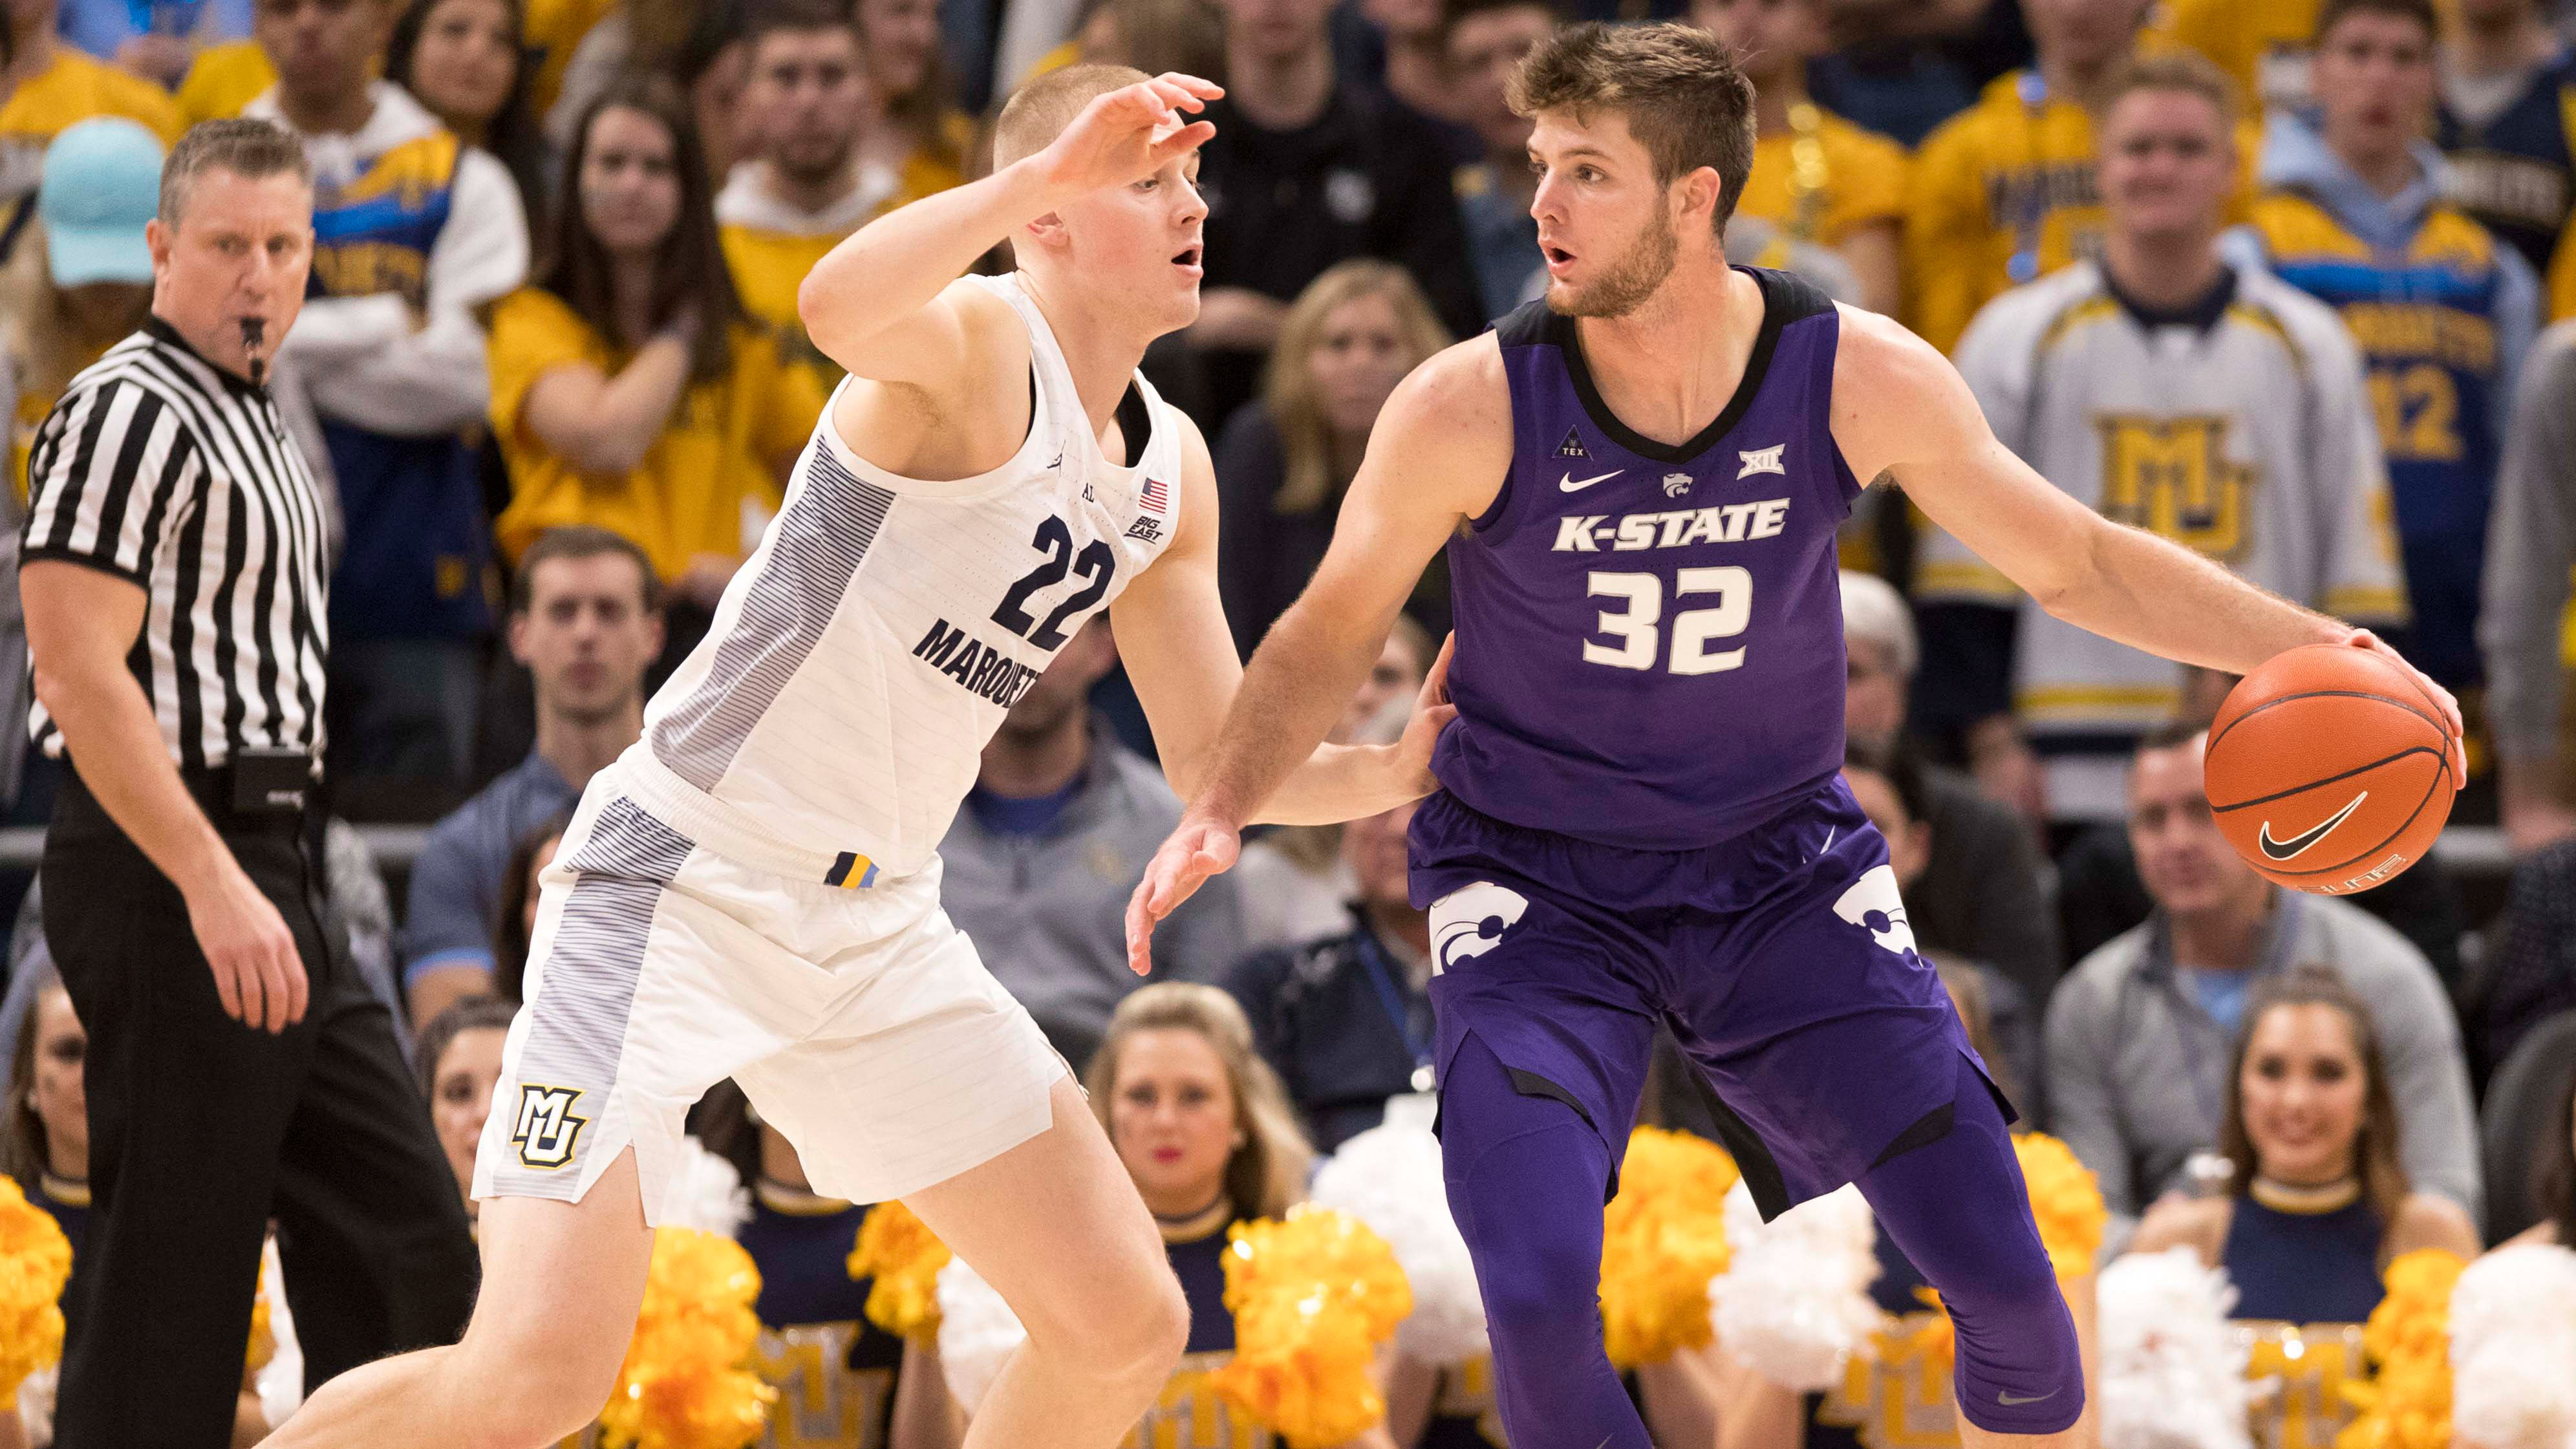 No. 12 Kansas State handed first loss as defense struggles in 83-71 defeat